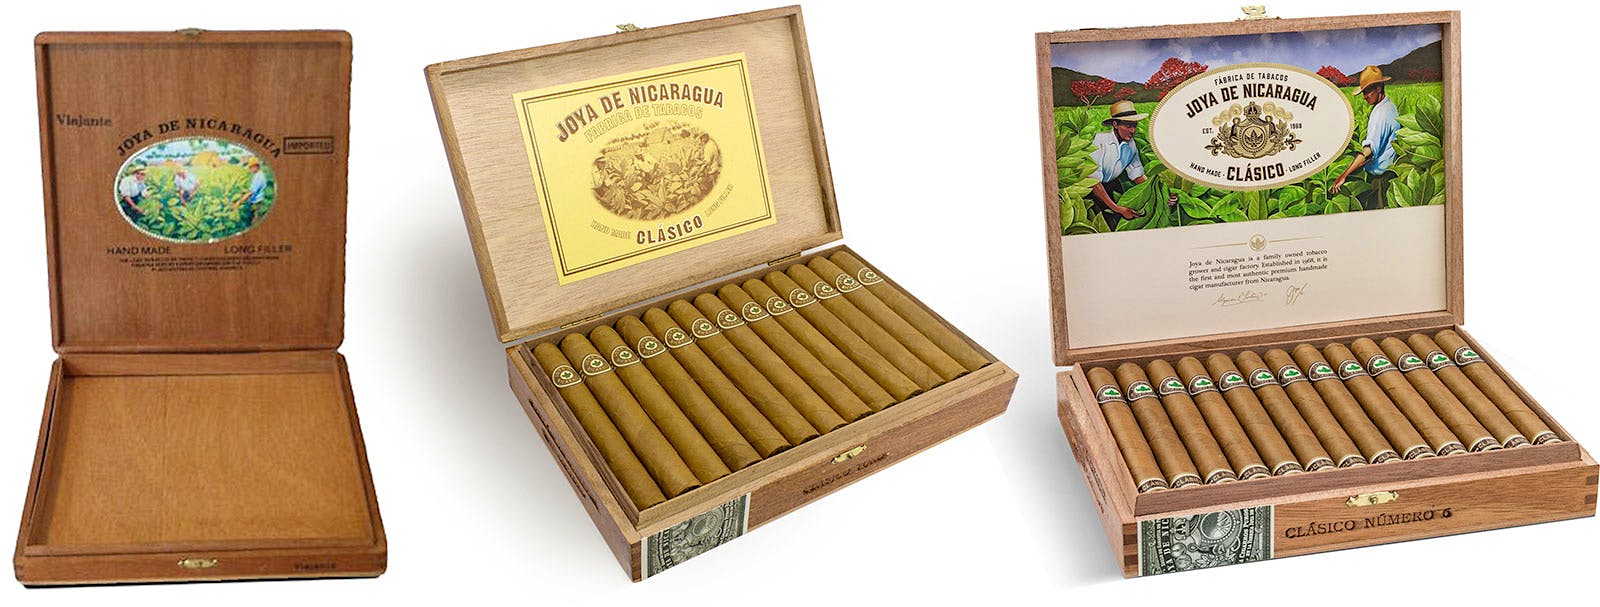 The redesigned packaging of Joya de Nicaragua Clásico, right, pays homage to the brand's previous iterations, left and center.